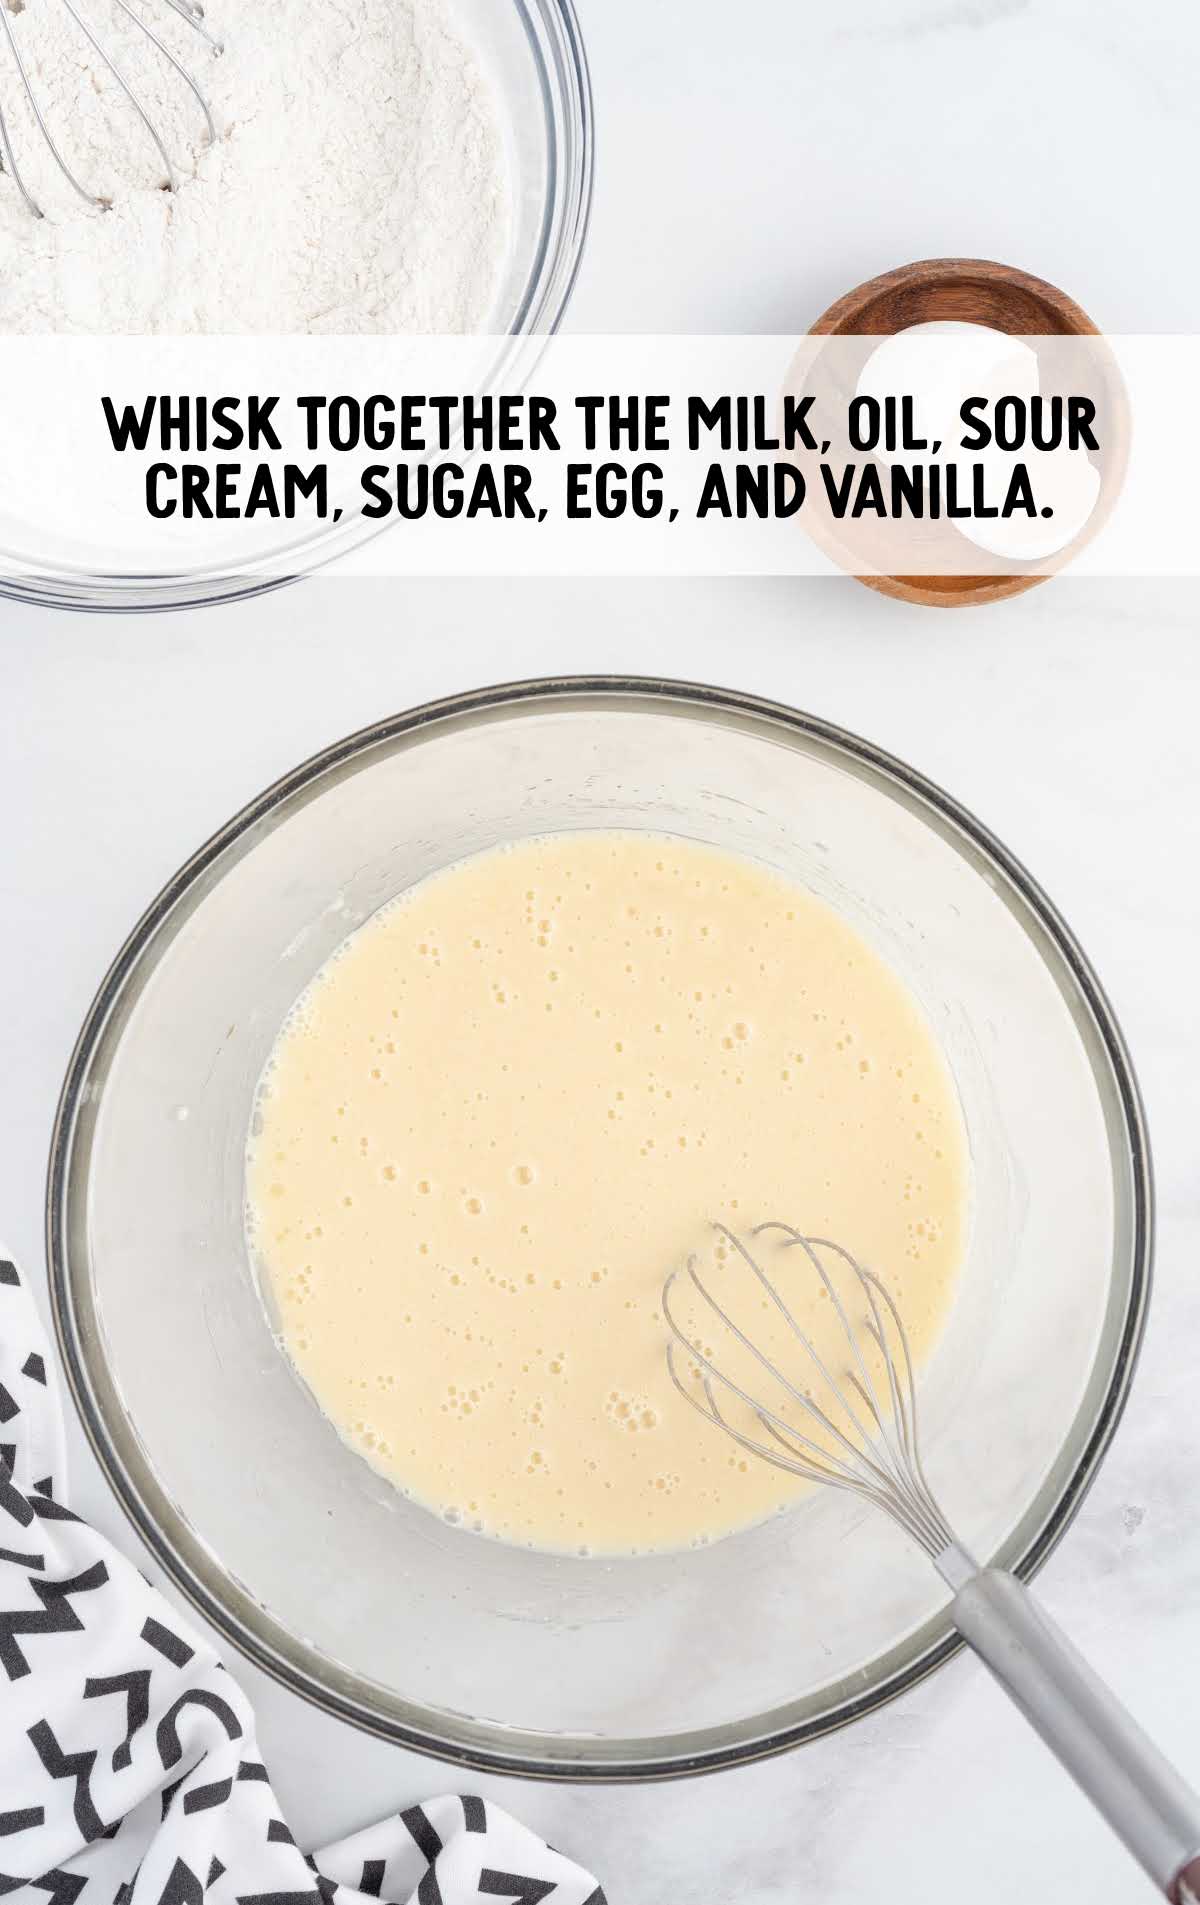 milk, oil, sour cream, sugar, egg, and vanilla whisked in a bowl